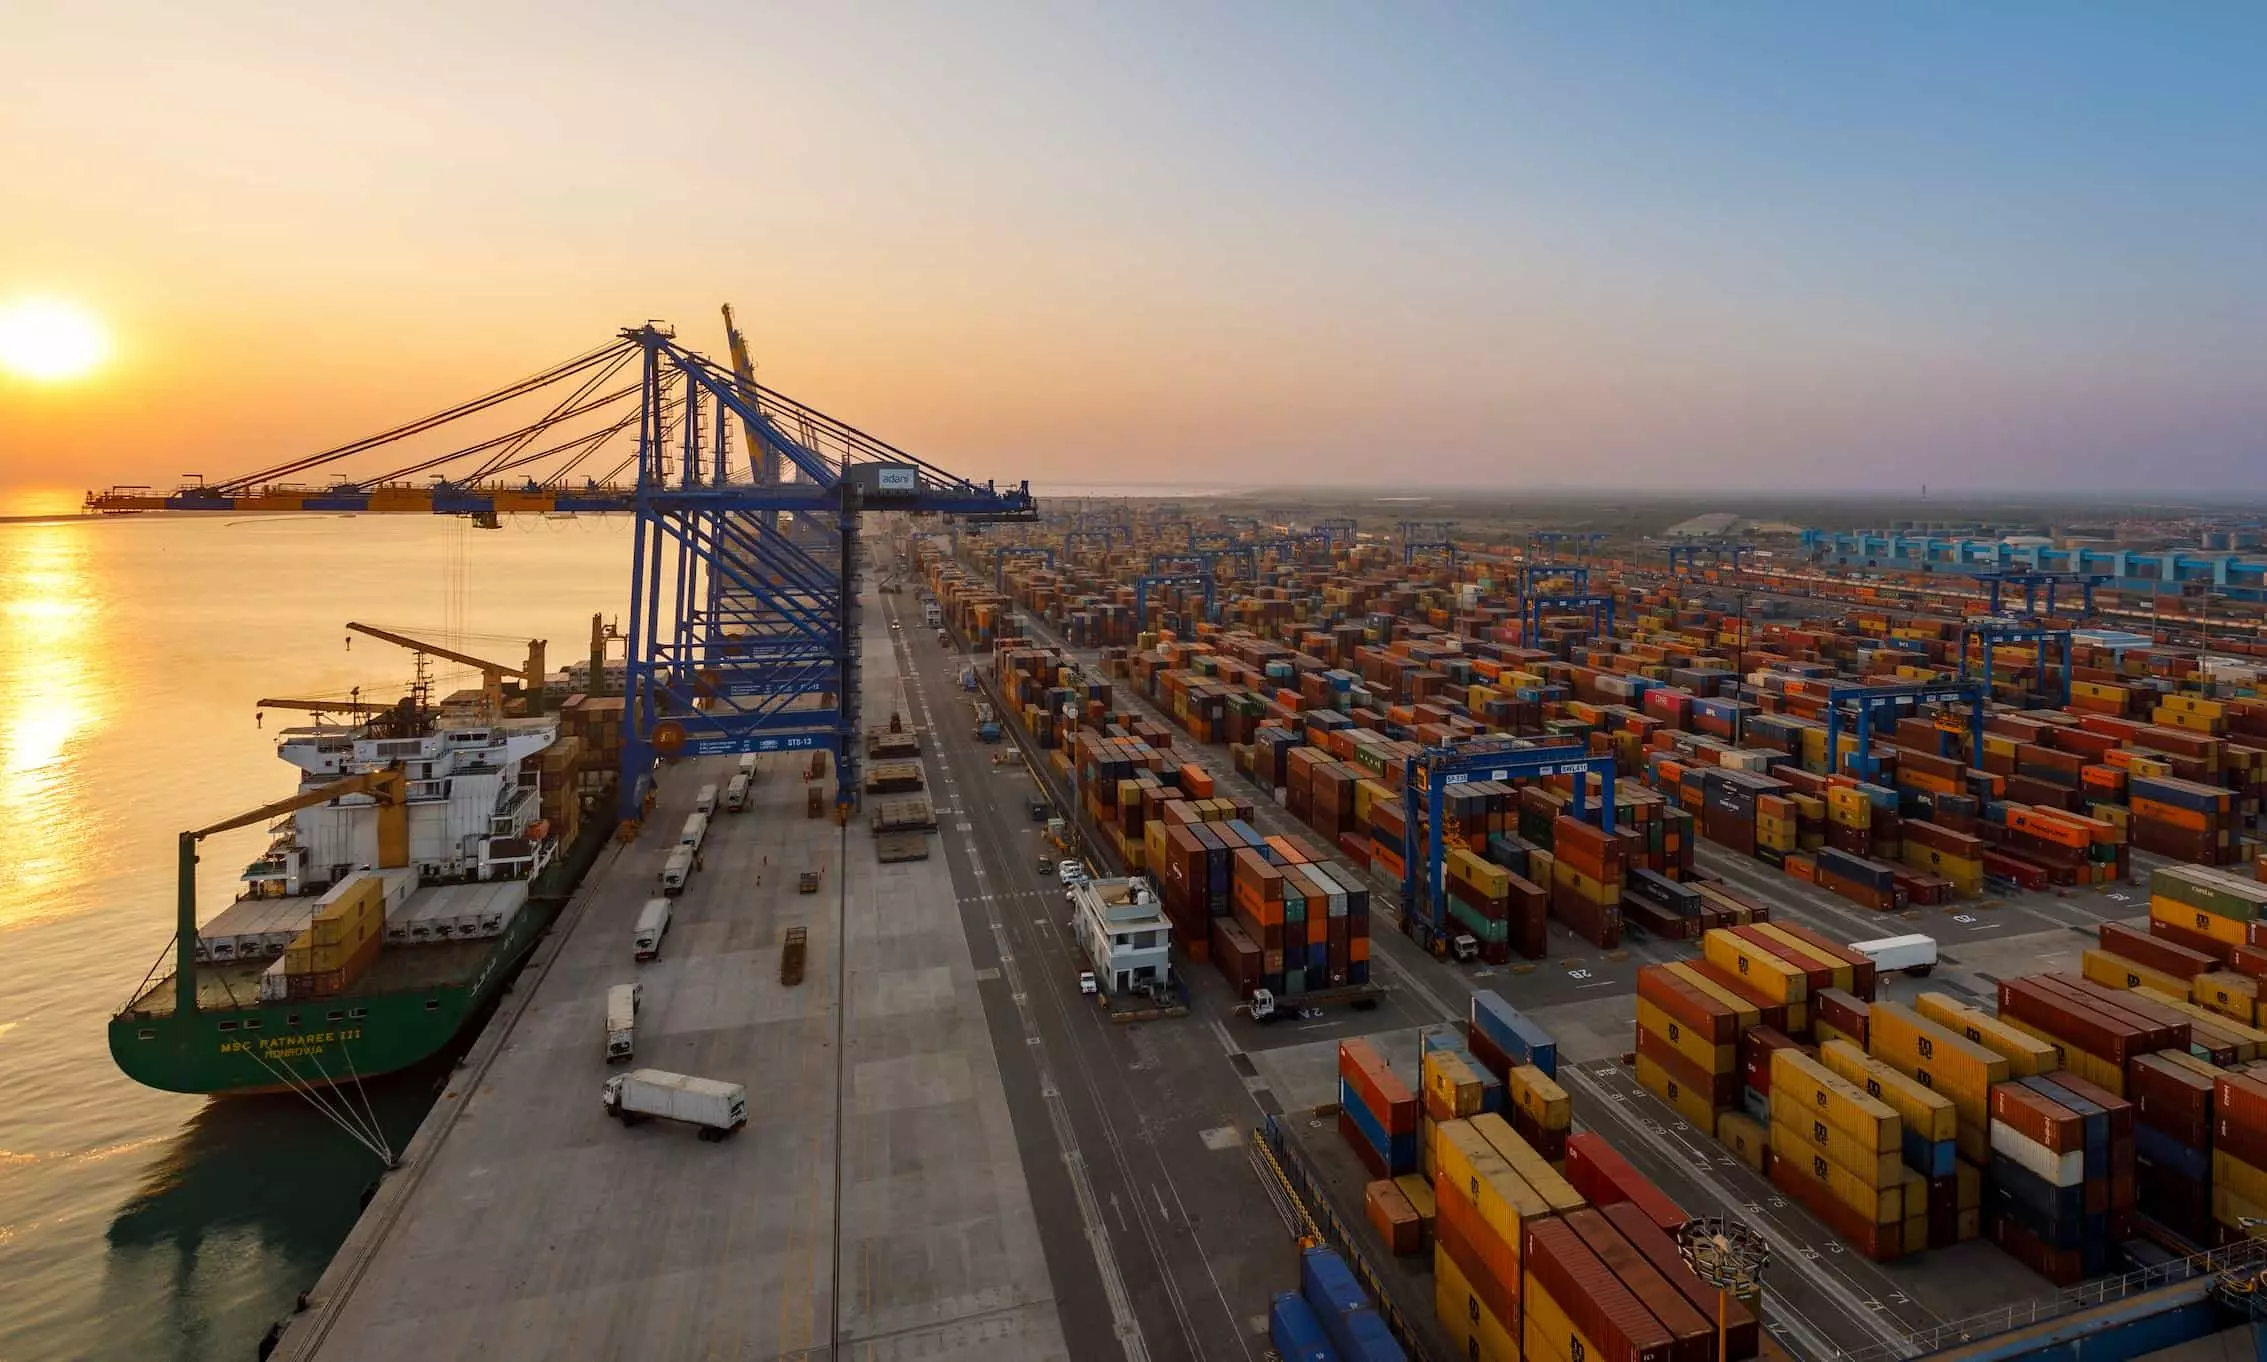 Mundra Port completes 25 years of operations